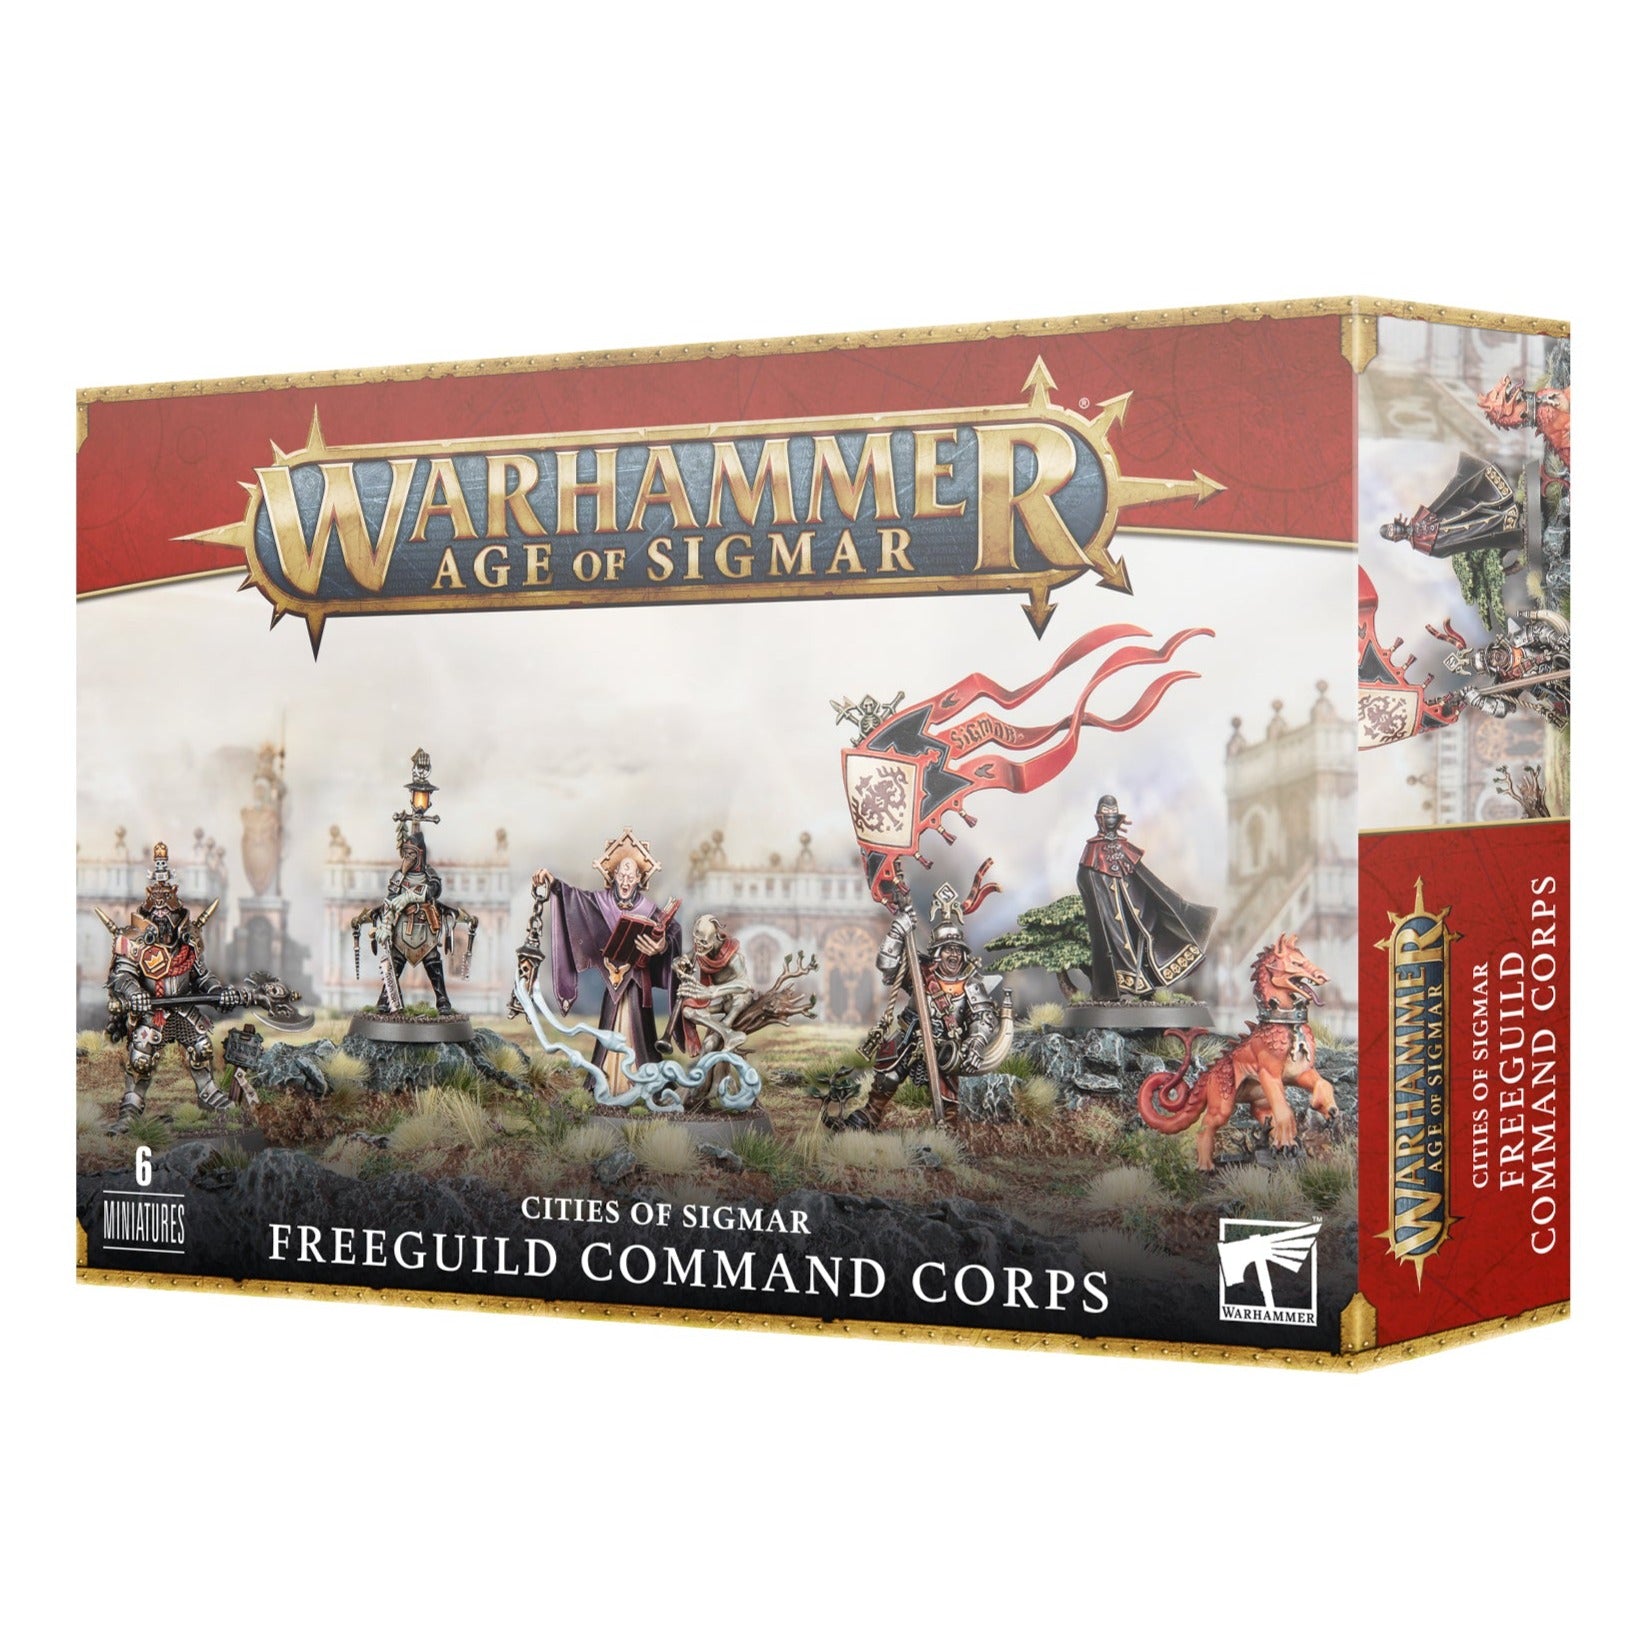 Cities of Sigmar: Freeguild Command Corps - Release Date 11/11/23 - Loaded Dice Barry Vale of Glamorgan CF64 3HD